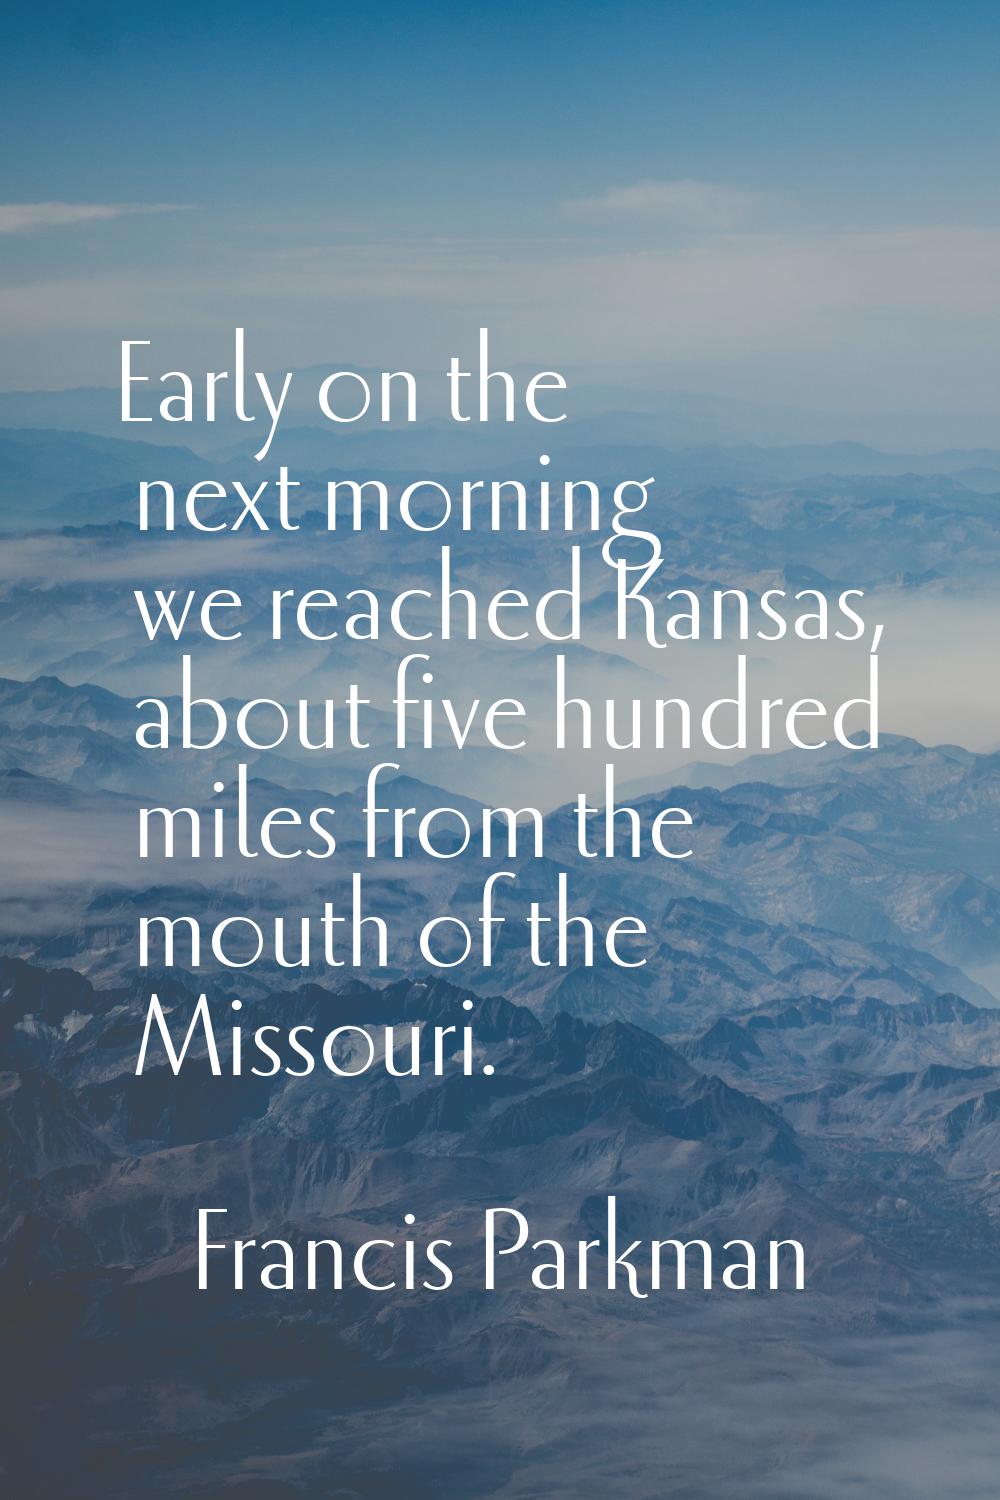 Early on the next morning we reached Kansas, about five hundred miles from the mouth of the Missour